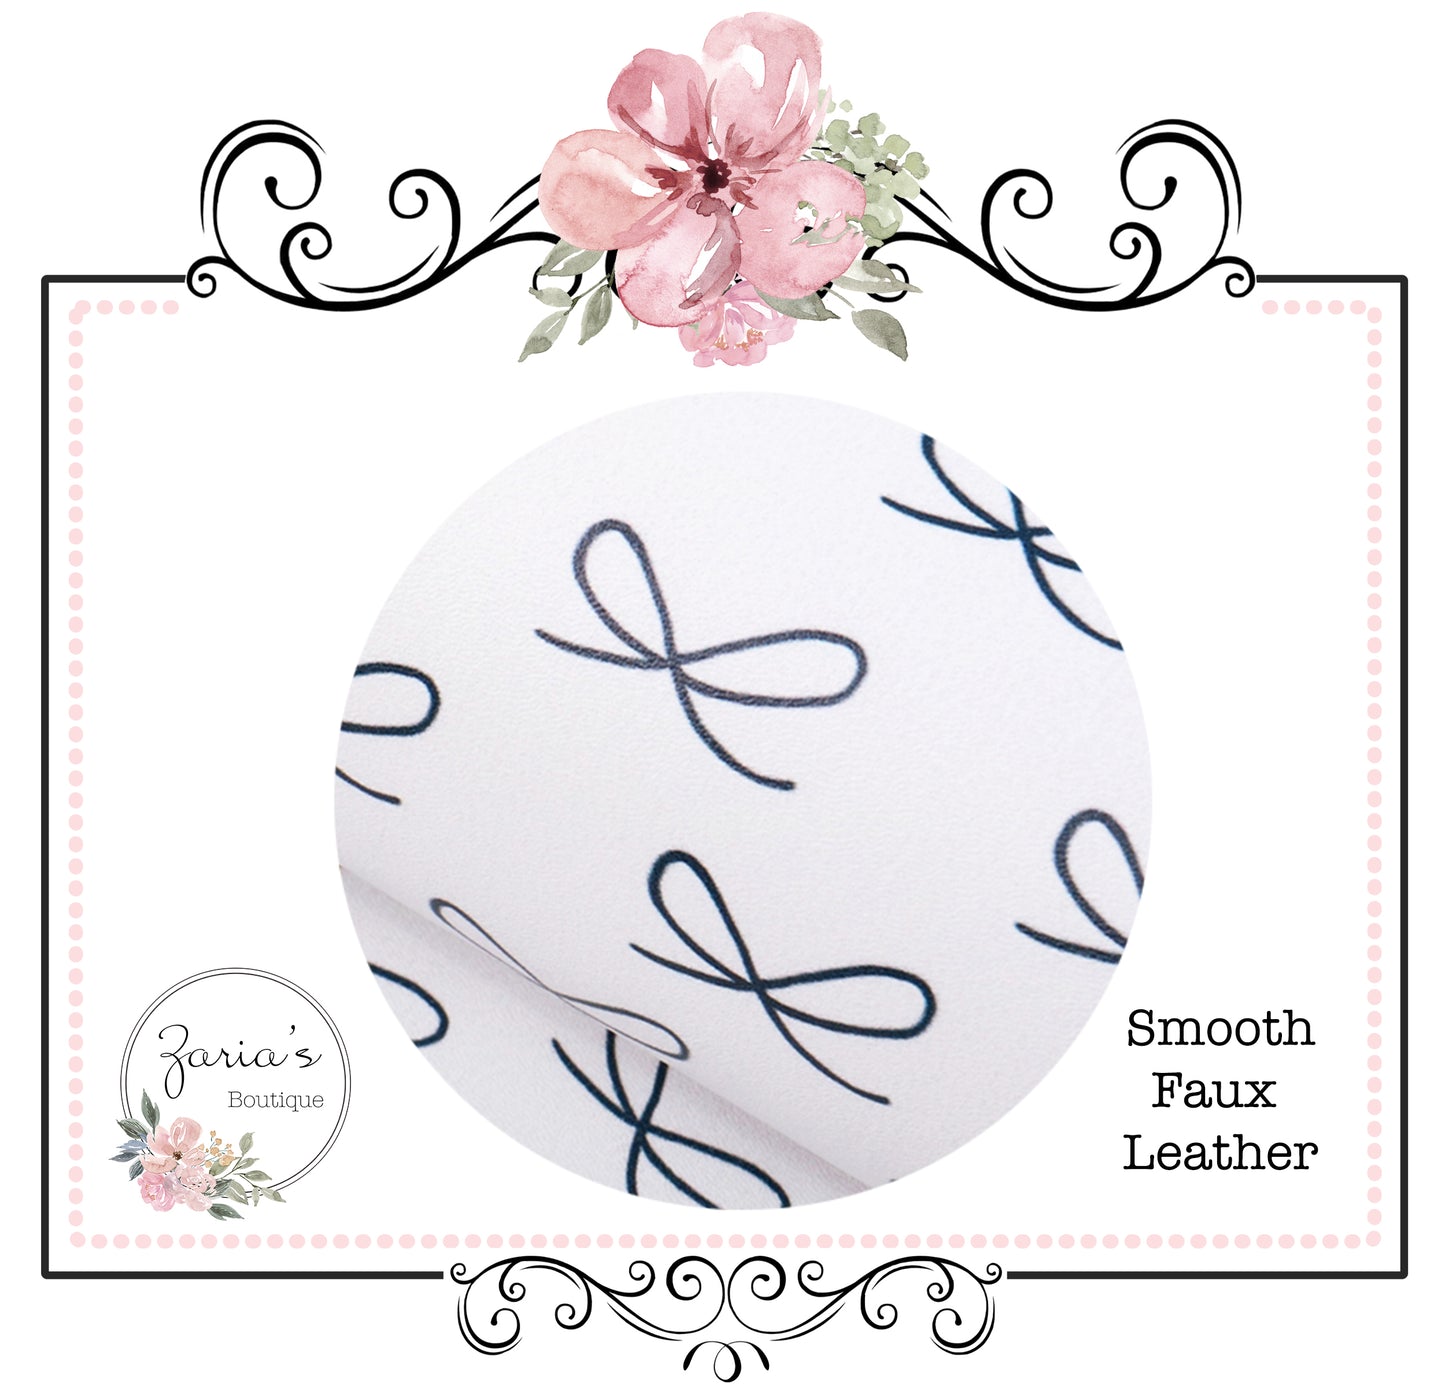 Navy & White Bows ~ Smooth Faux Leather